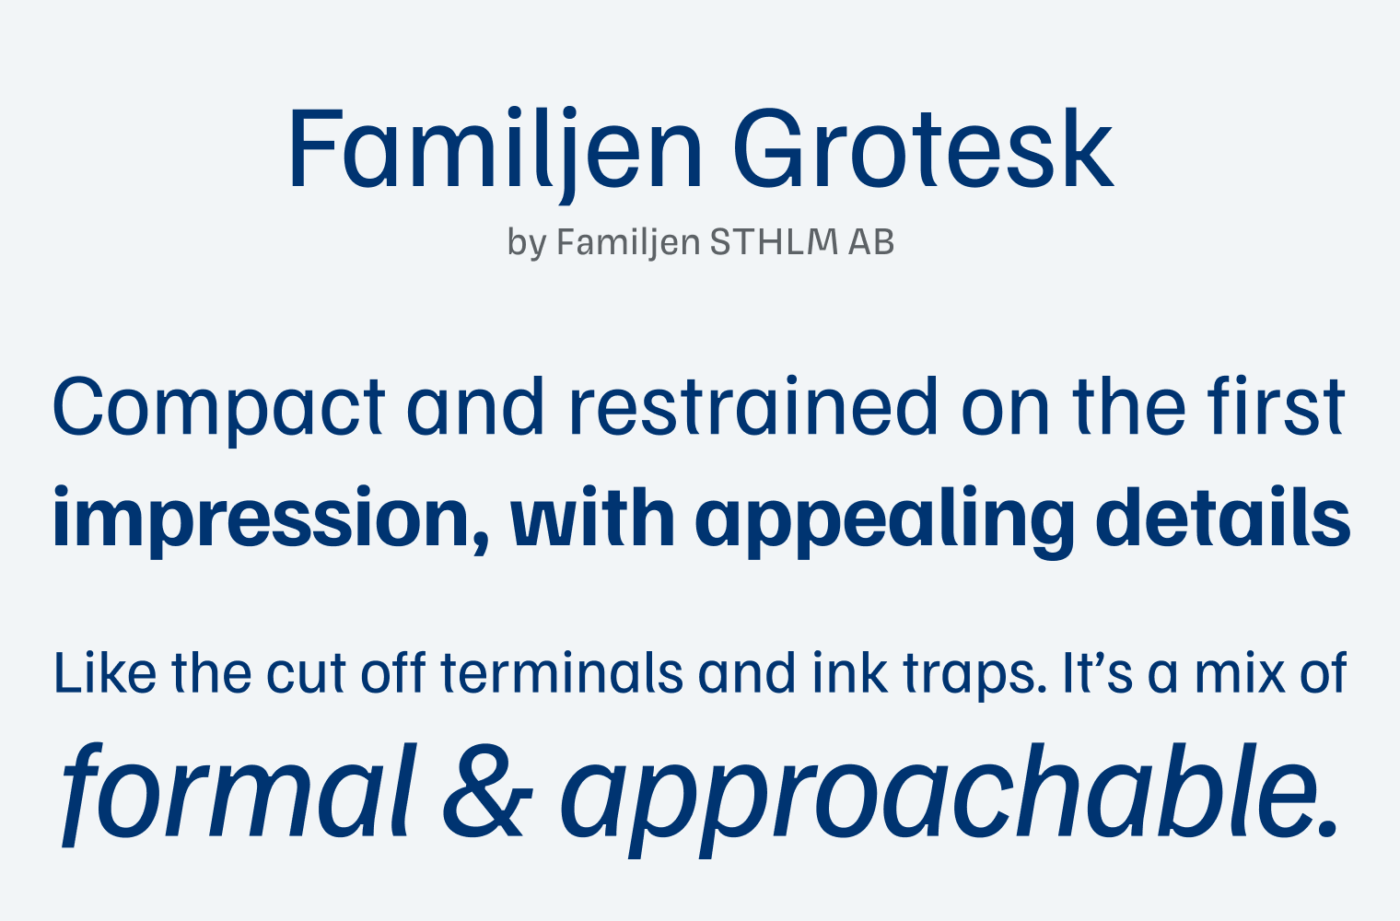 Familjen Grotesk
by Familien STHLM AB
Compact and restrained on the first impression, with appealing details
Like the cut off terminals and ink traps. It's a mix of formal & approachable.